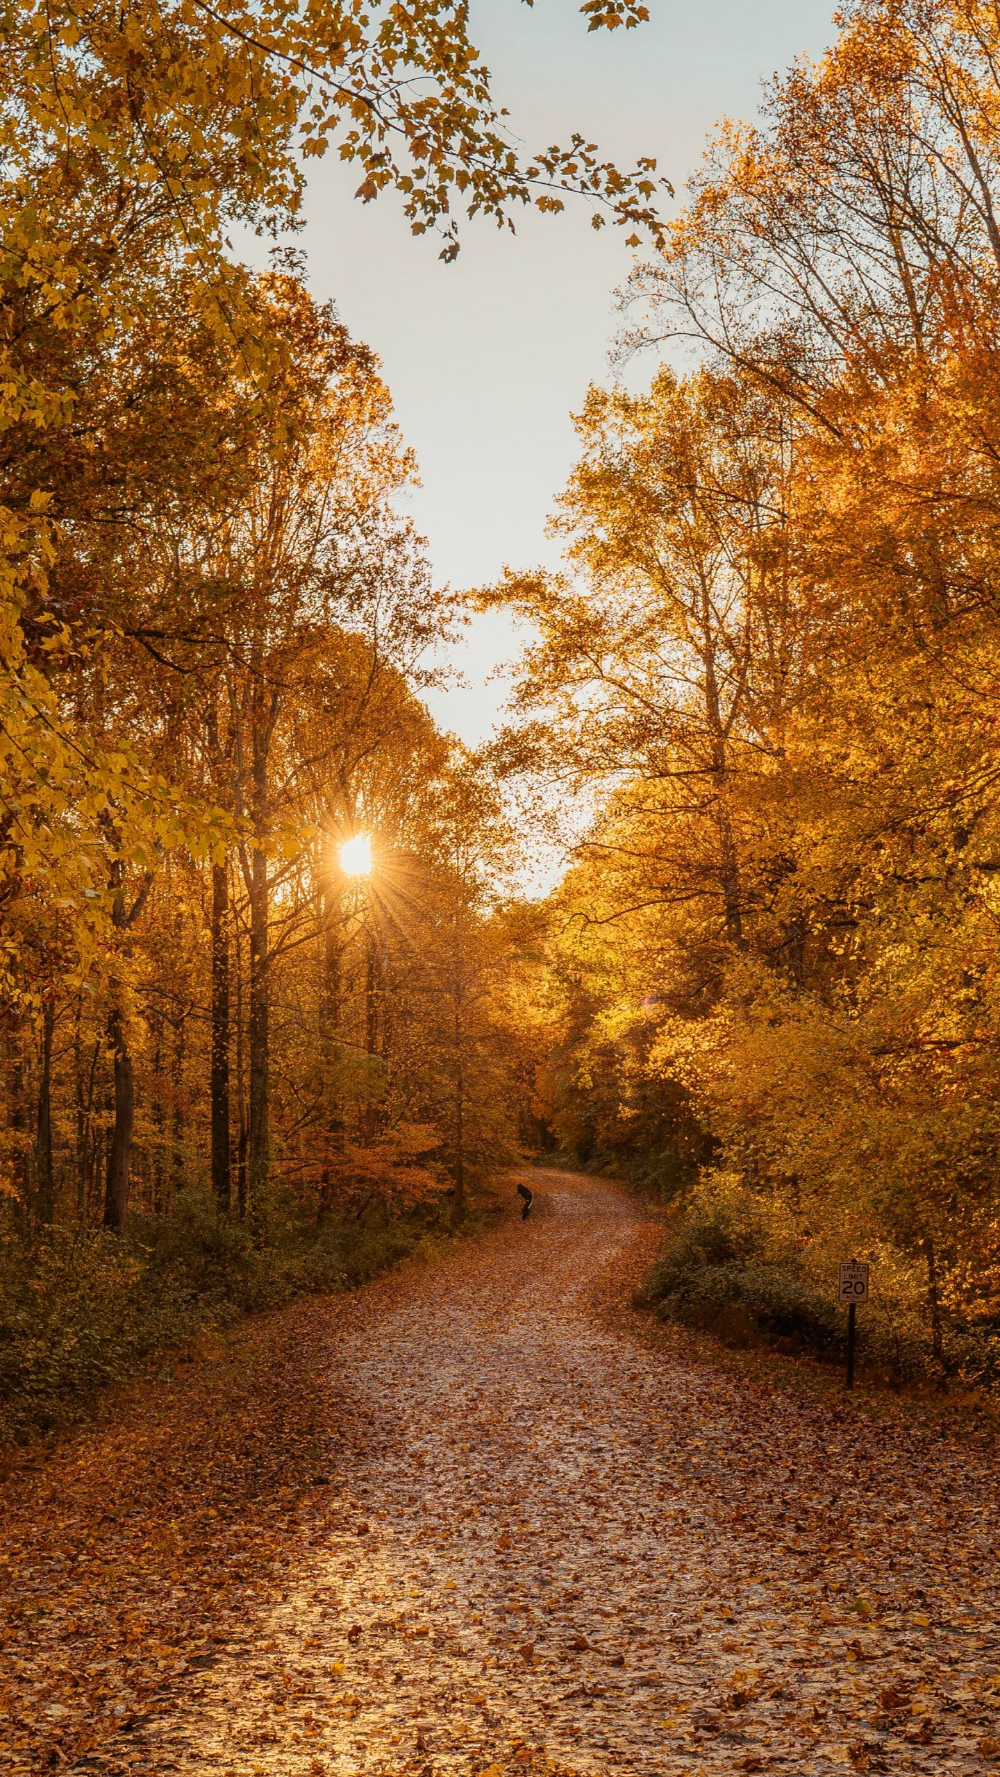 Download wallpaper 1440x2560 forest, road, autumn, trees, landscape qhd samsung galaxy s s edge, note, lg g4 HD b. Forest road, Landscape, Landscape wallpaper